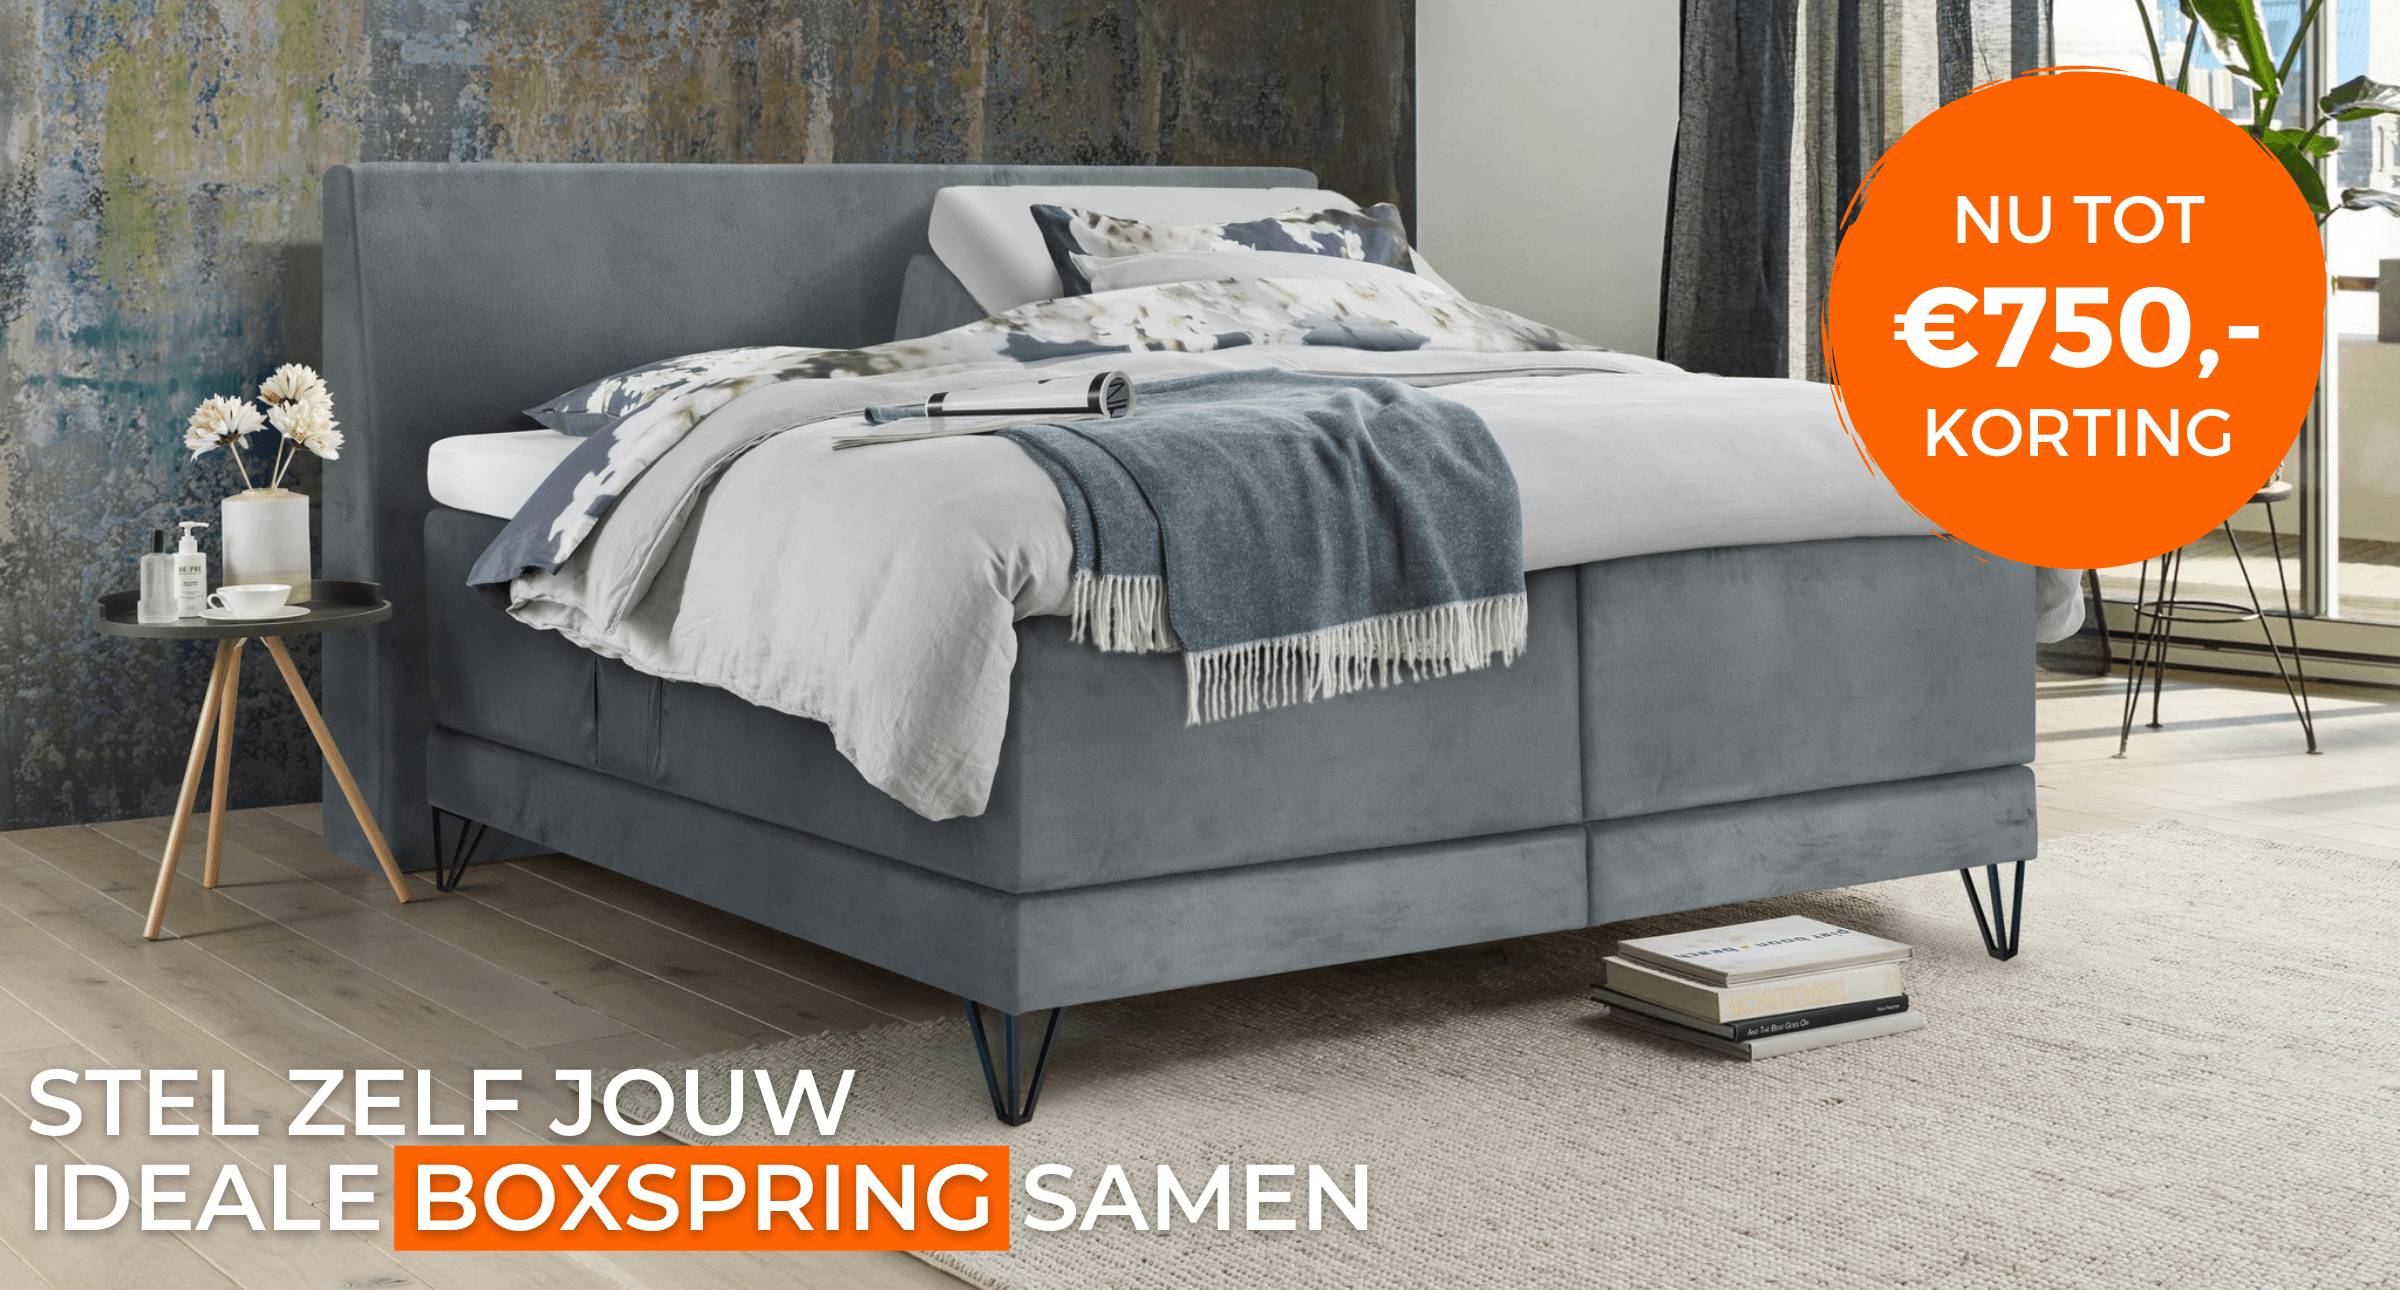 oplichter Banzai Harde ring Boxspring Outlet | Tot 30% korting op boxsprings! | Beddenplein -  Beddenplein.nl